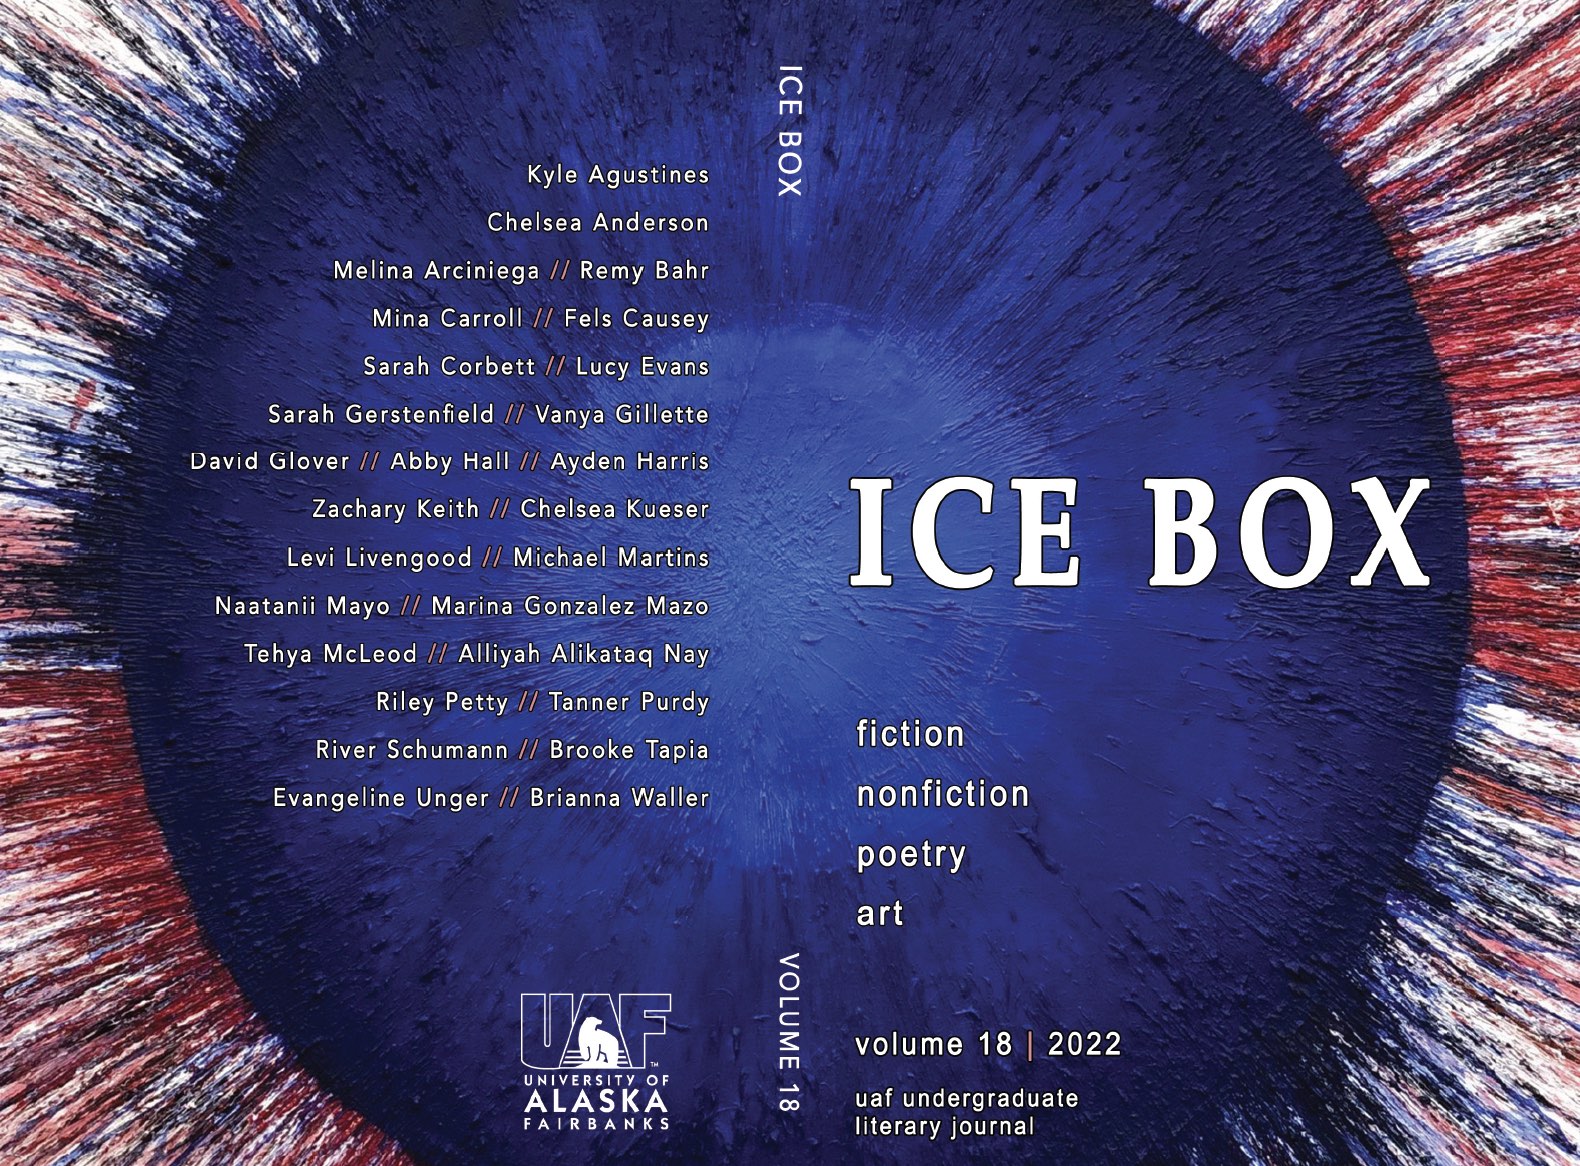 Cover art for Ice Box Issue #18. A large blue blob with red, blue, and white streaks emanating from it. The front cover says "Ice Box" in large text. The back cover lists all contributors.